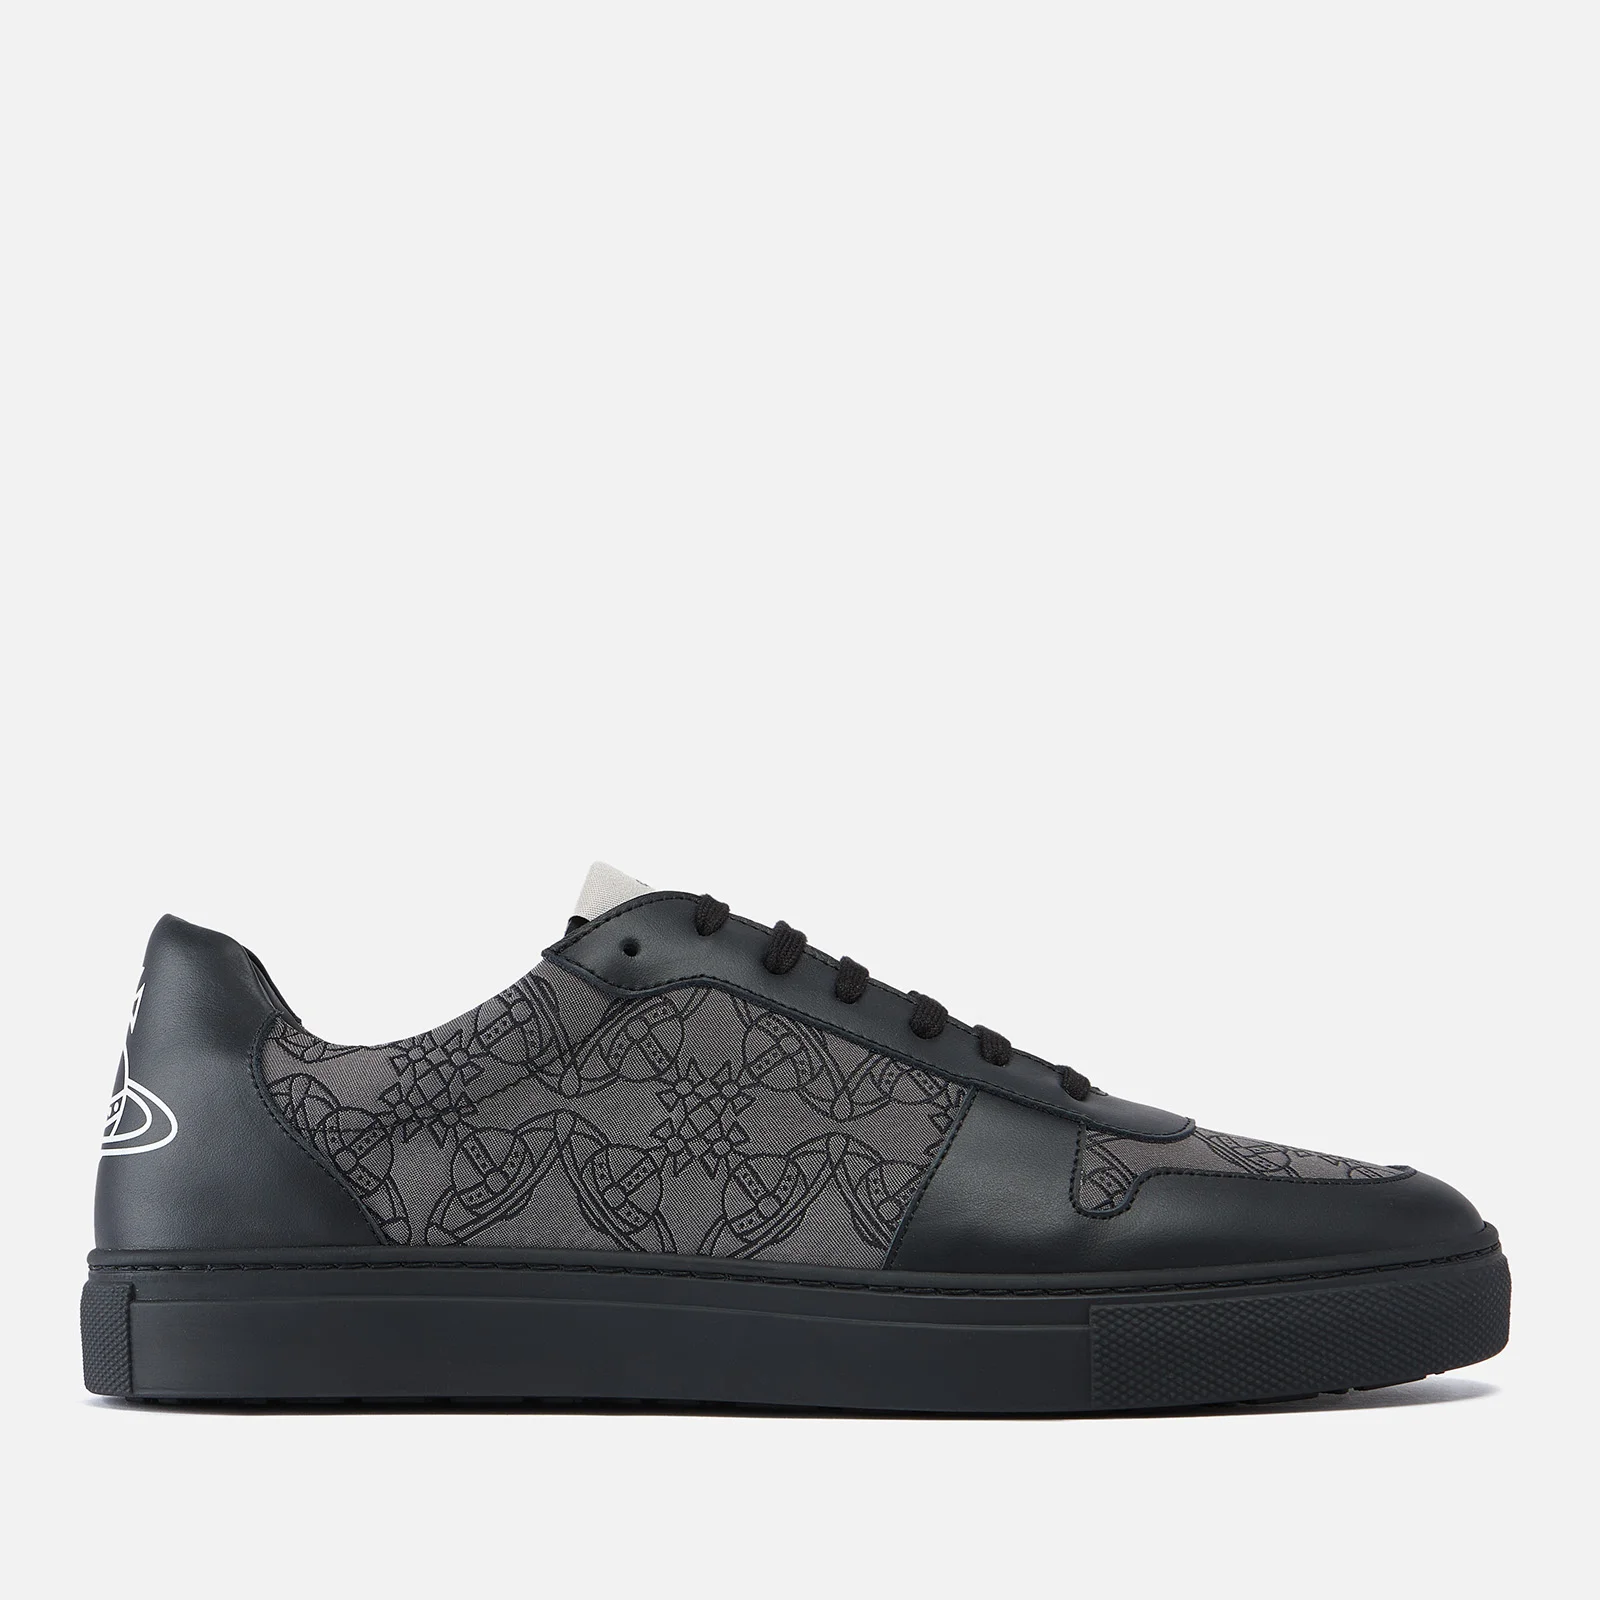 Vivienne Westwood Jacquard and Leather Trainers Image 1